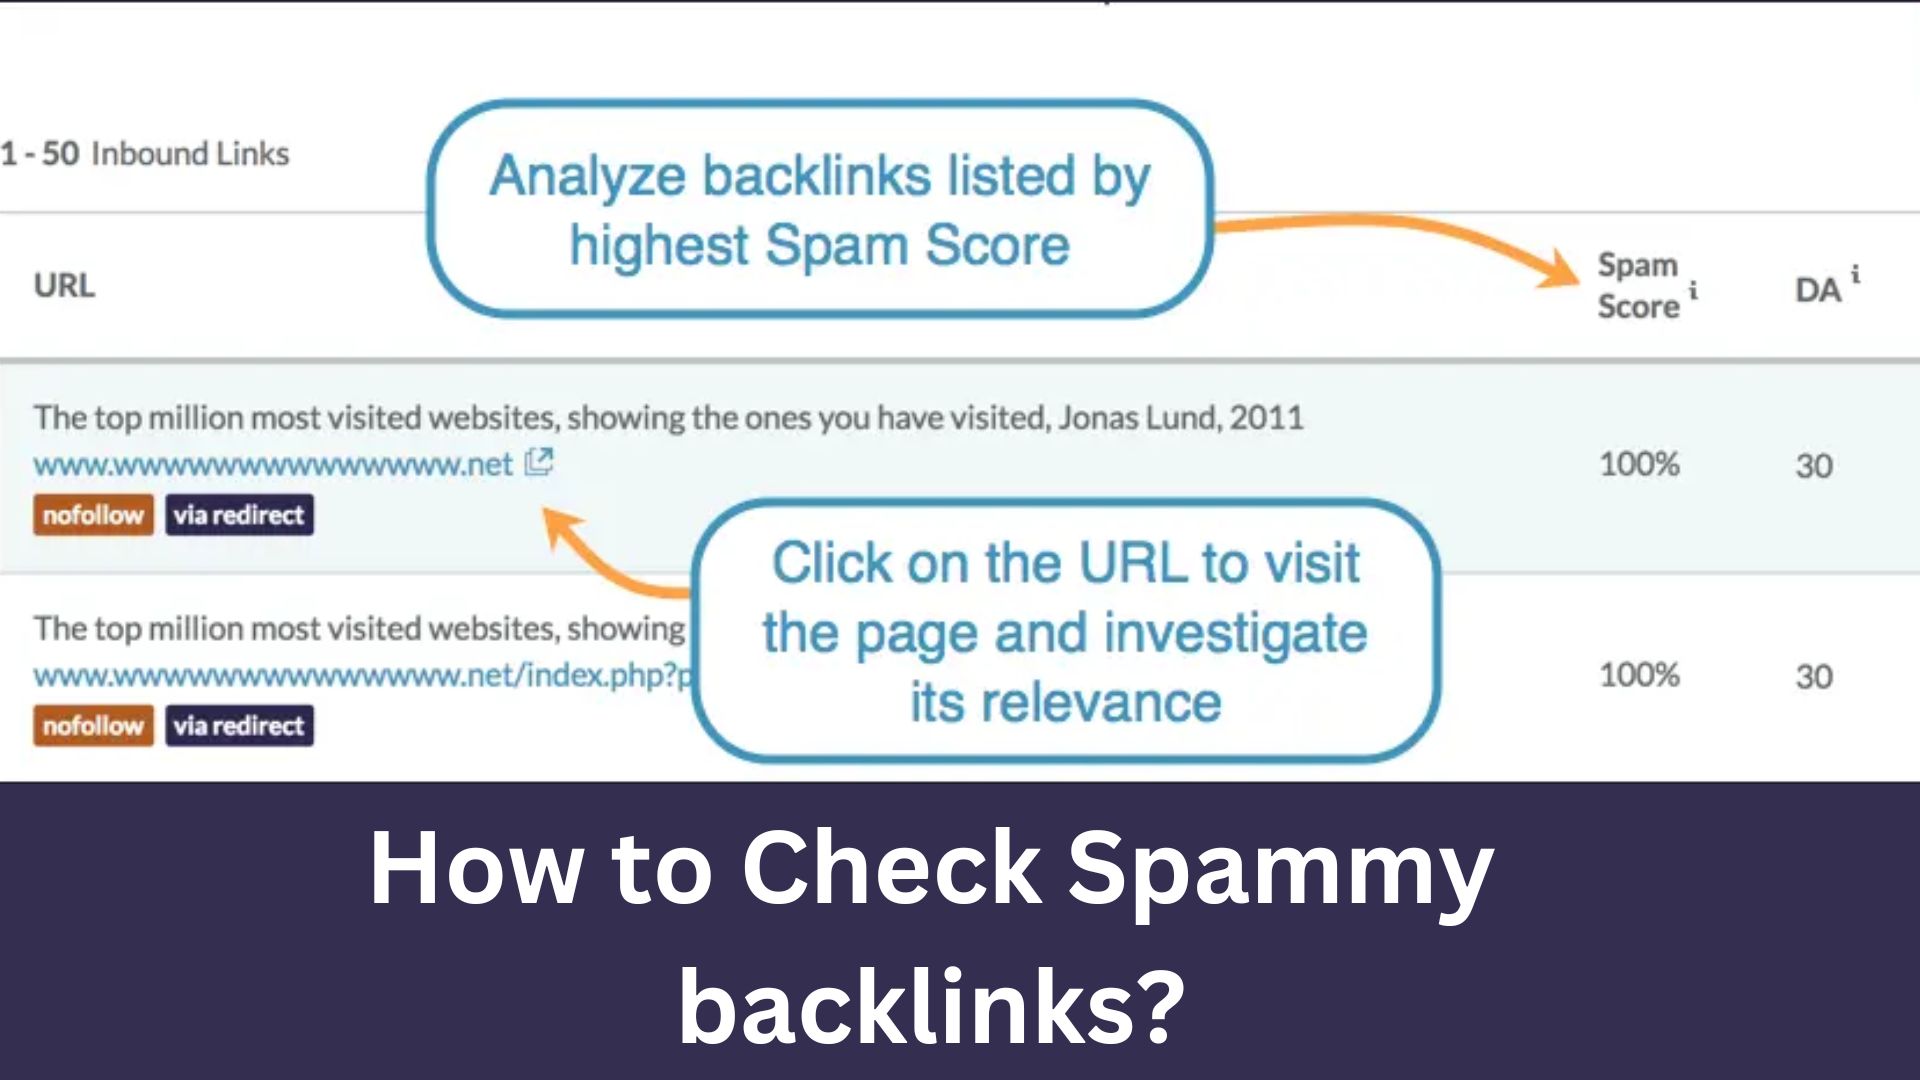 How to Check Spammy backlinks